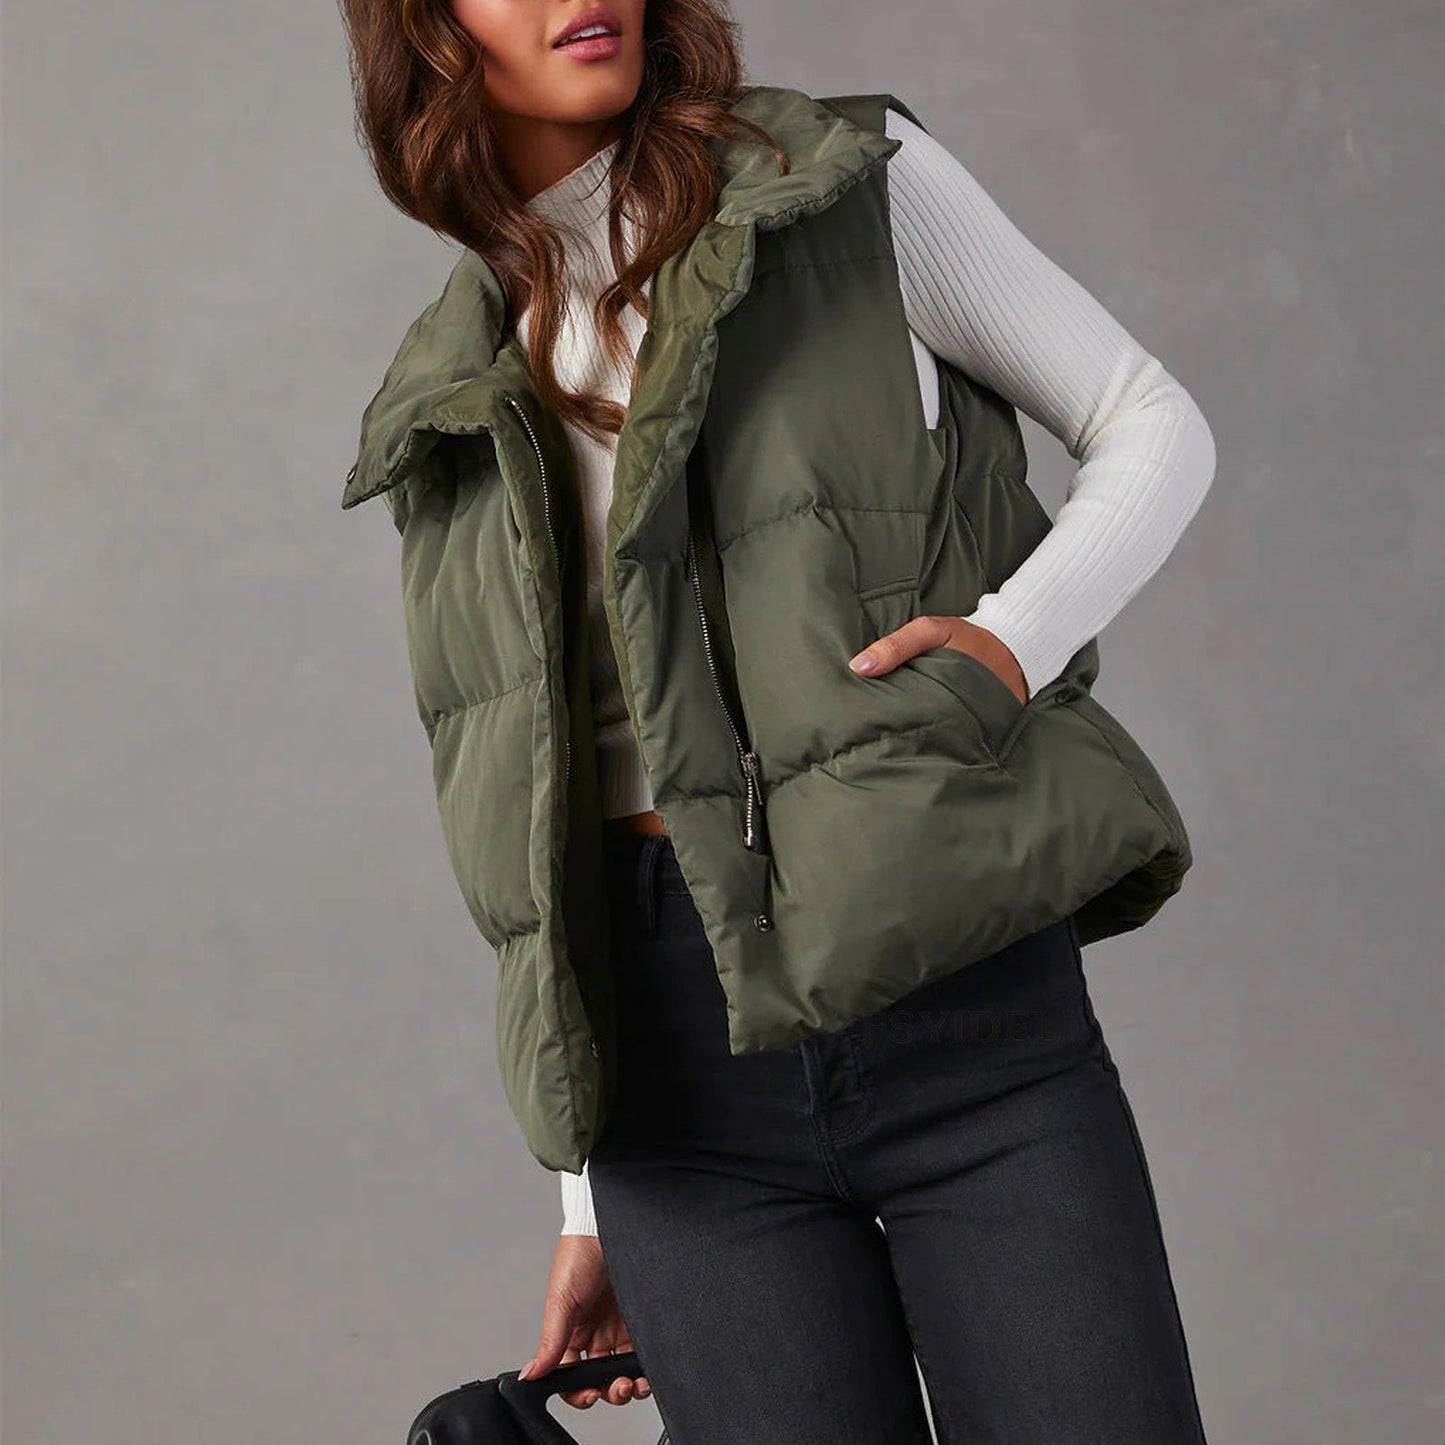 Autumn Winter Solid Color Vest Collared Sleeveless Cotton Padded Jacket Vest Cardigan Women